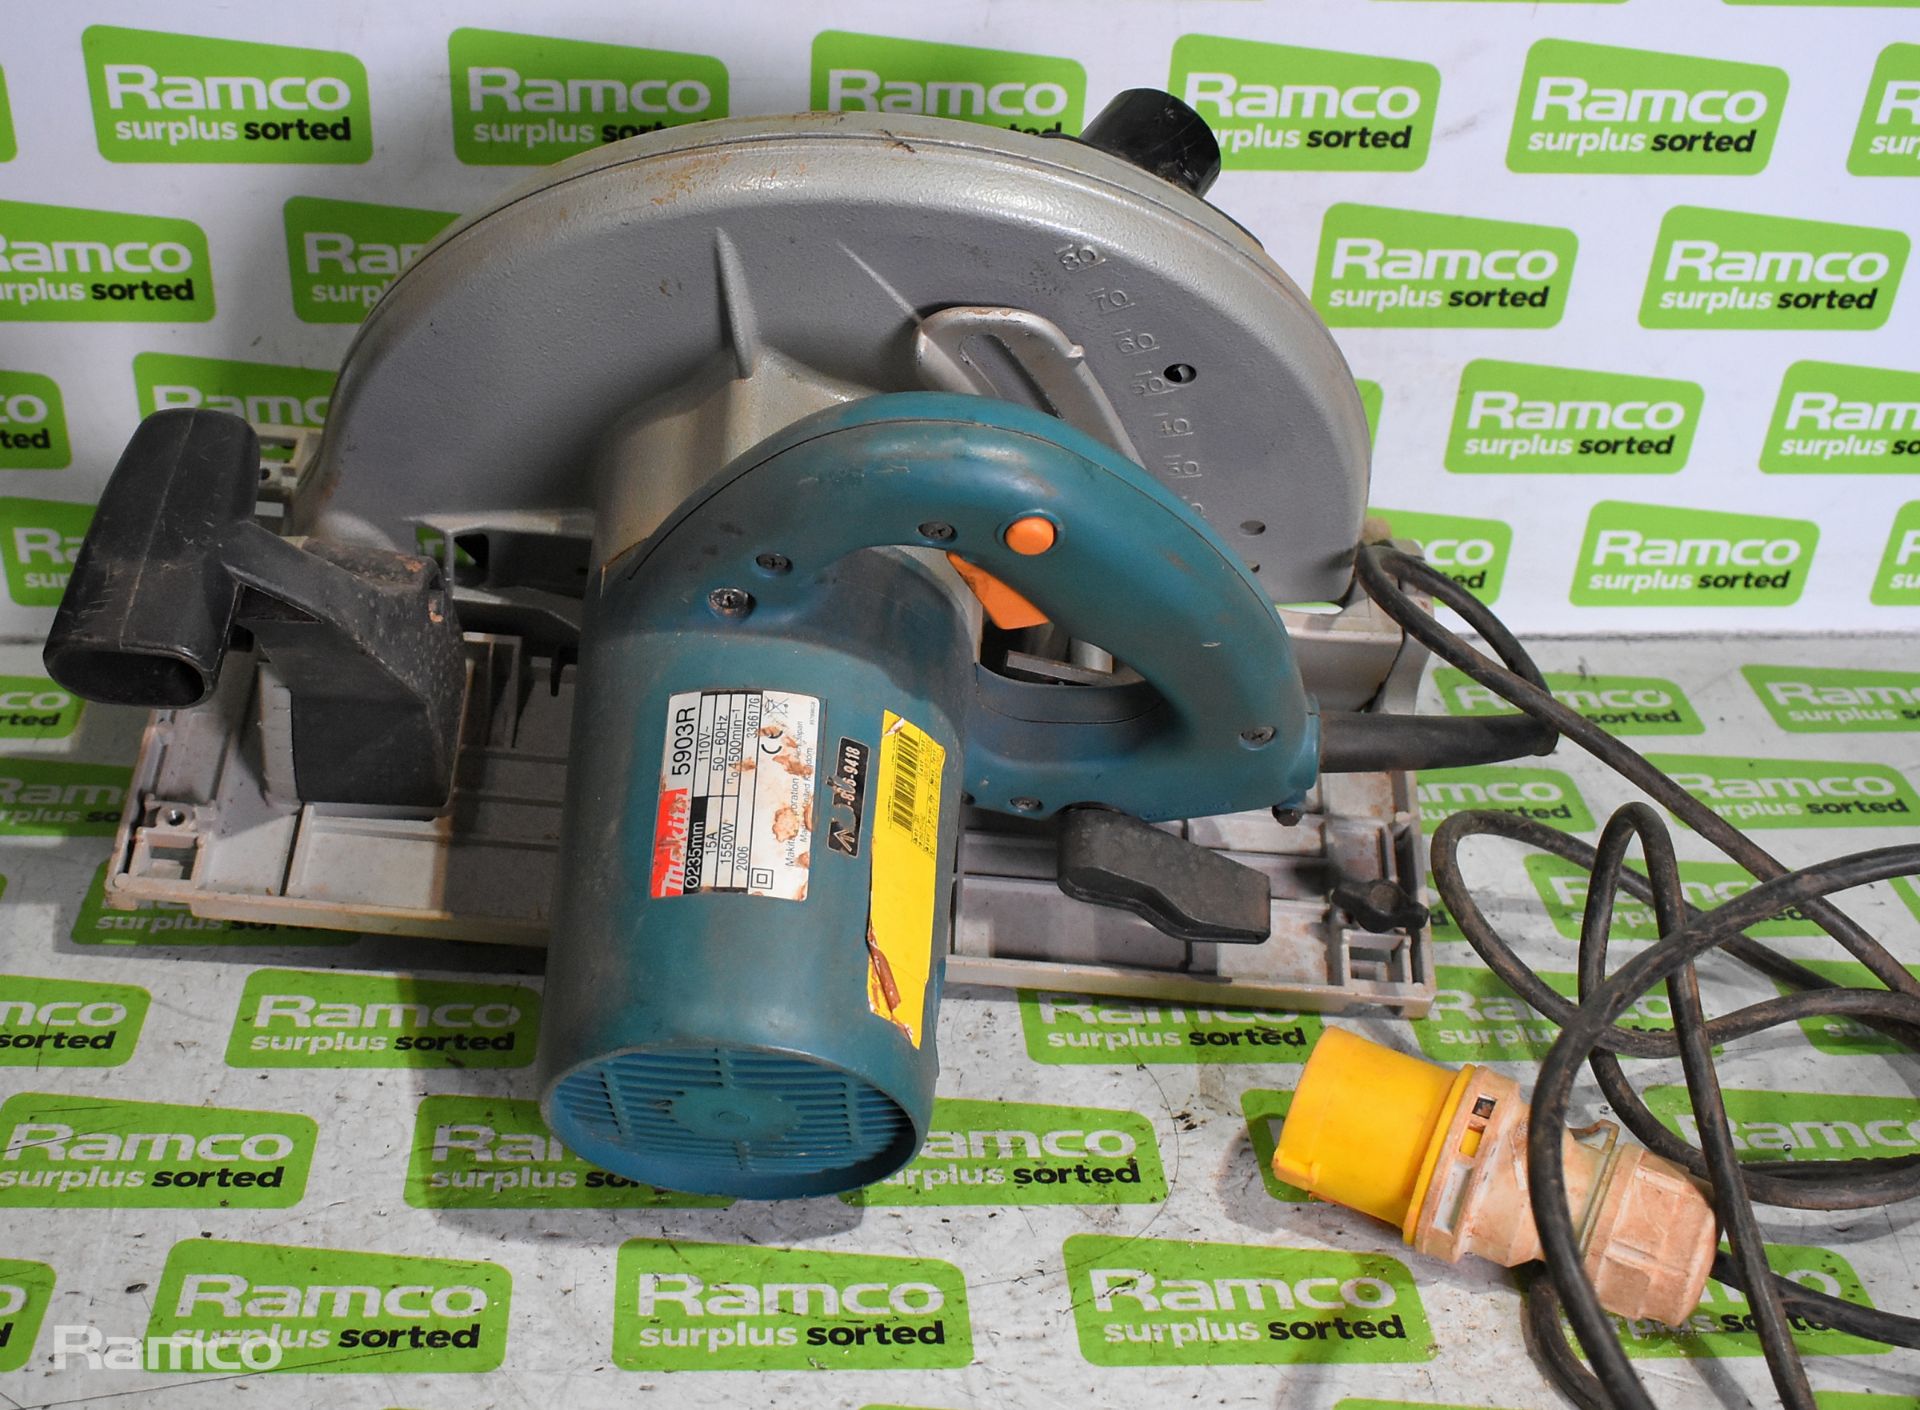 Makita 5903R 110V circular saw 1550W - 235mm blade with case - Image 5 of 10